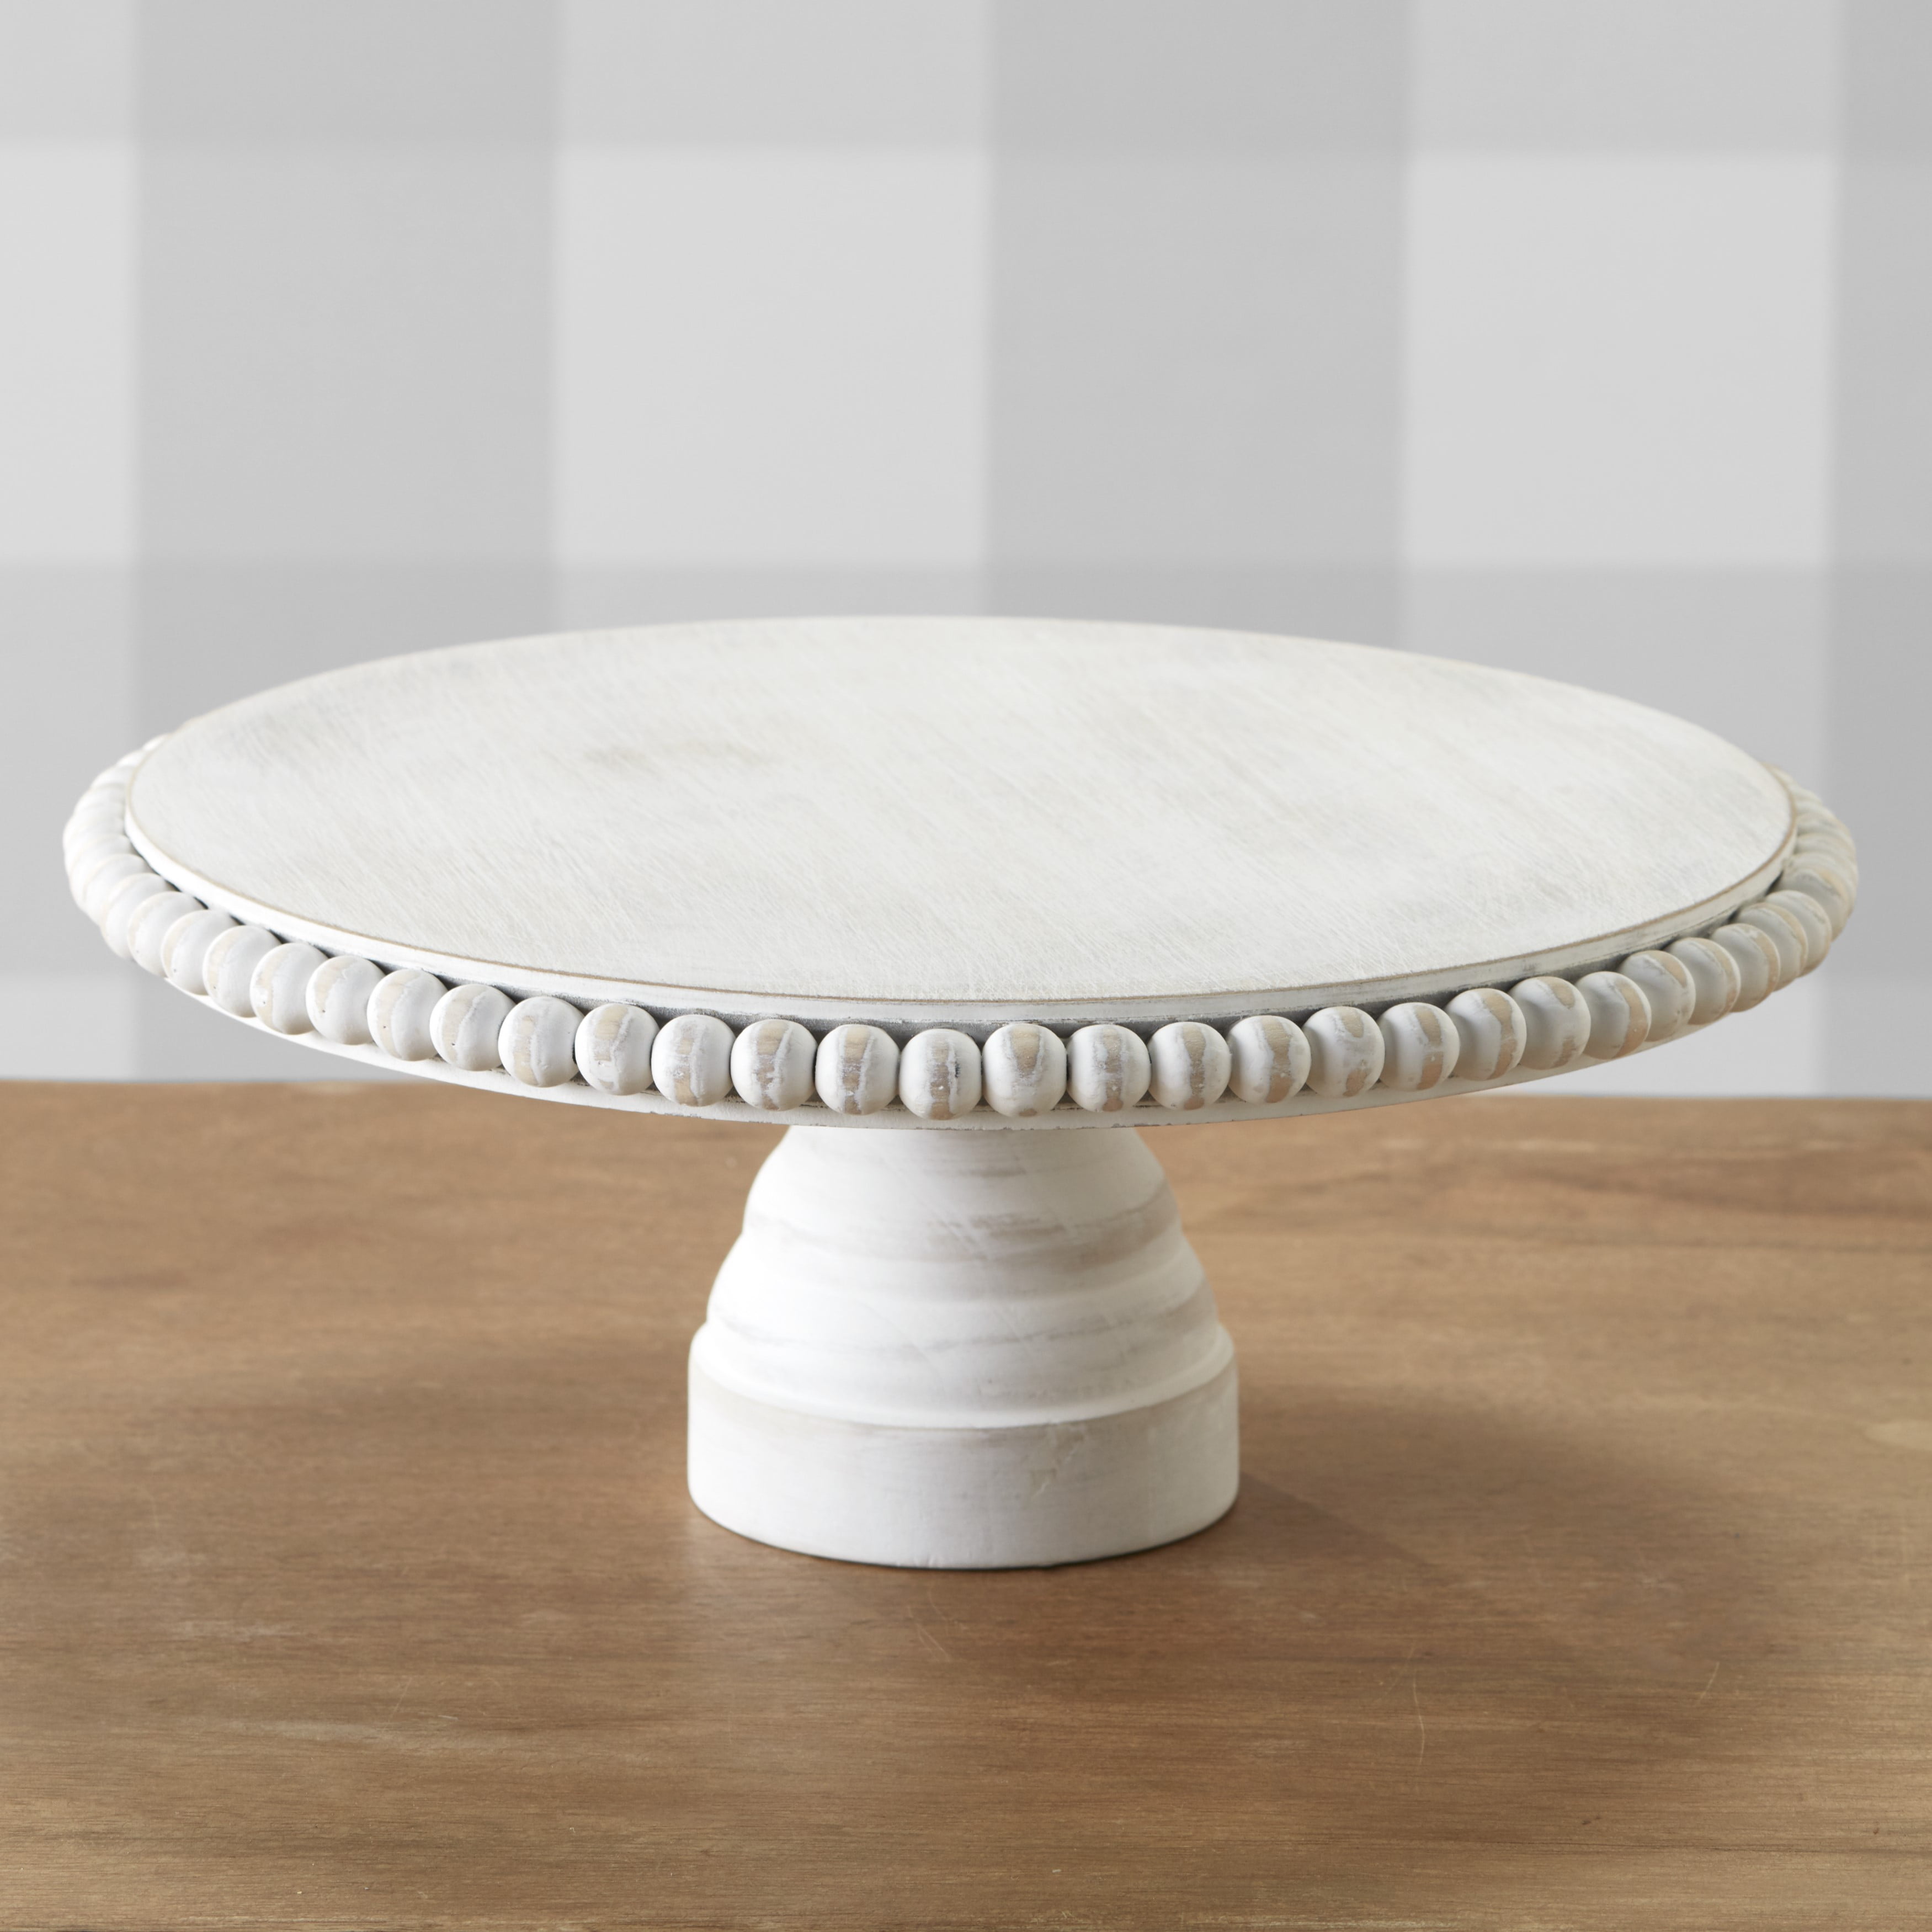 silver stand 18 inch gold stand 22 inch  Wood cake stand shabby white stand CAKE STAND distreessed gold stand